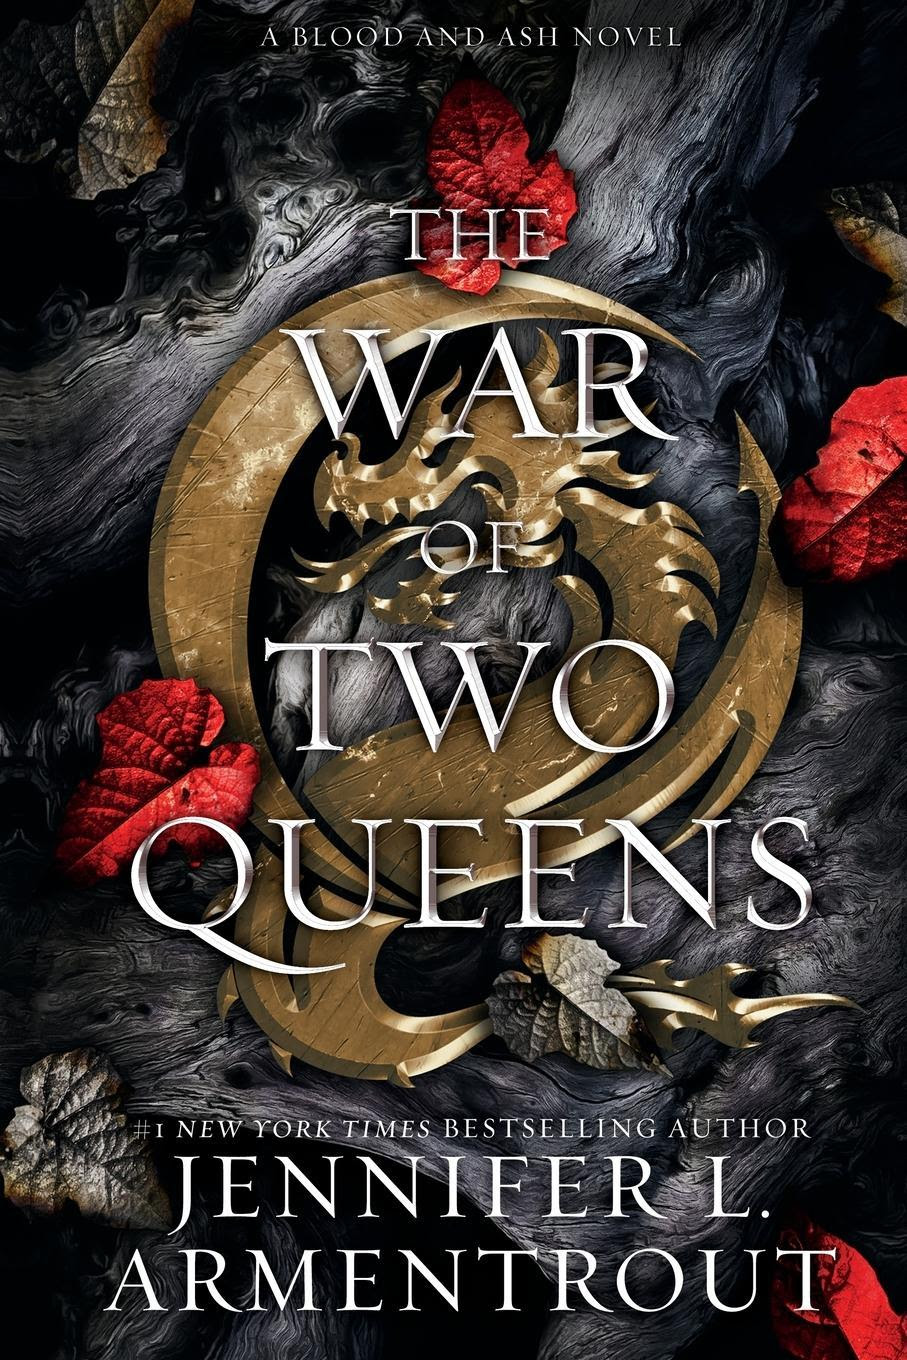 the war of two queens jennifer armentrout